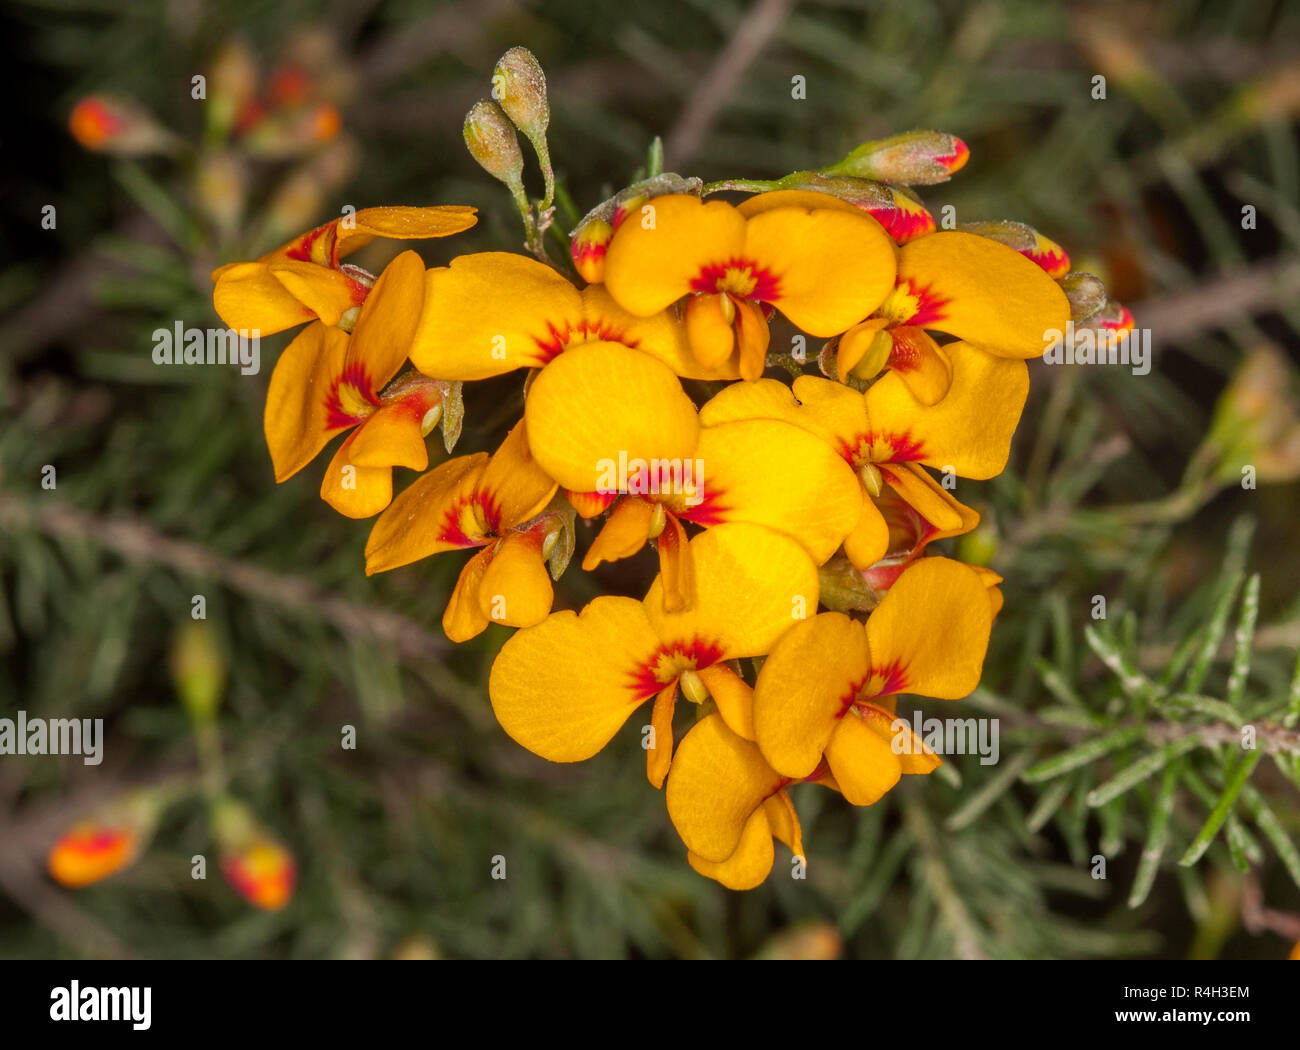 Australian wildflowers, vivid golden yellow flowers with red patches and tiny green leaves of shrub Dillwynia floribunda against dark green background Stock Photo